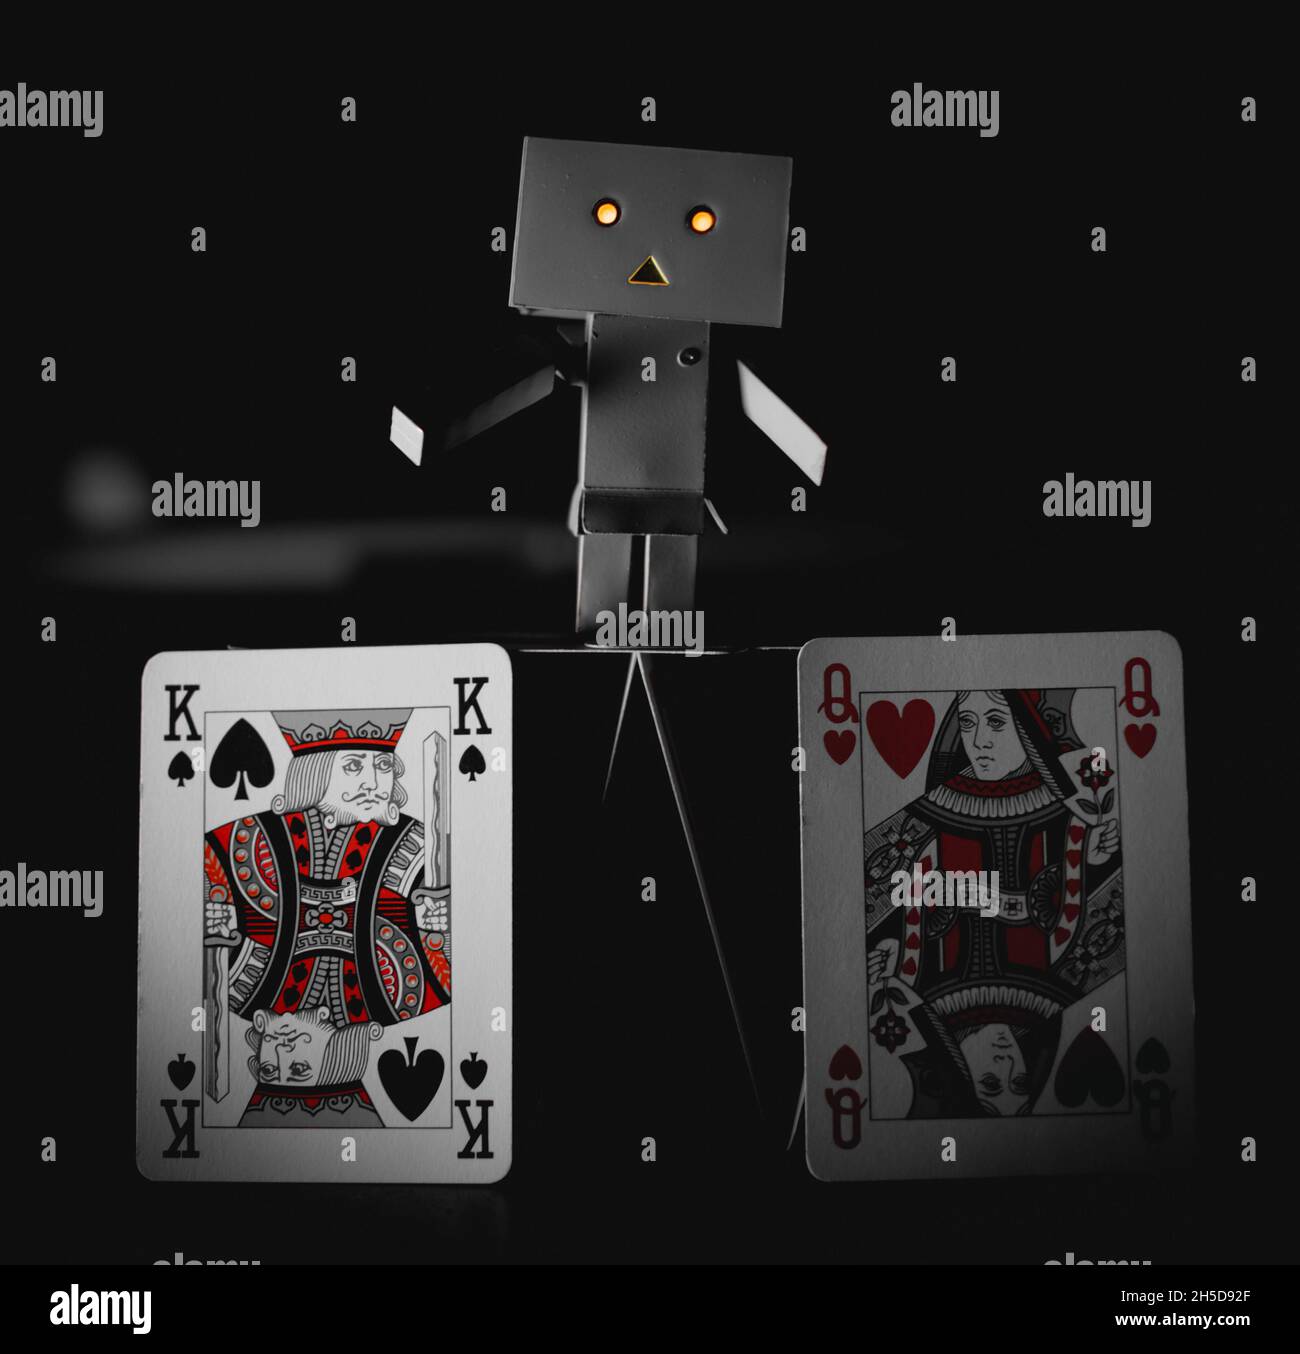 a lovely danbo robot playing with cards Stock Photo